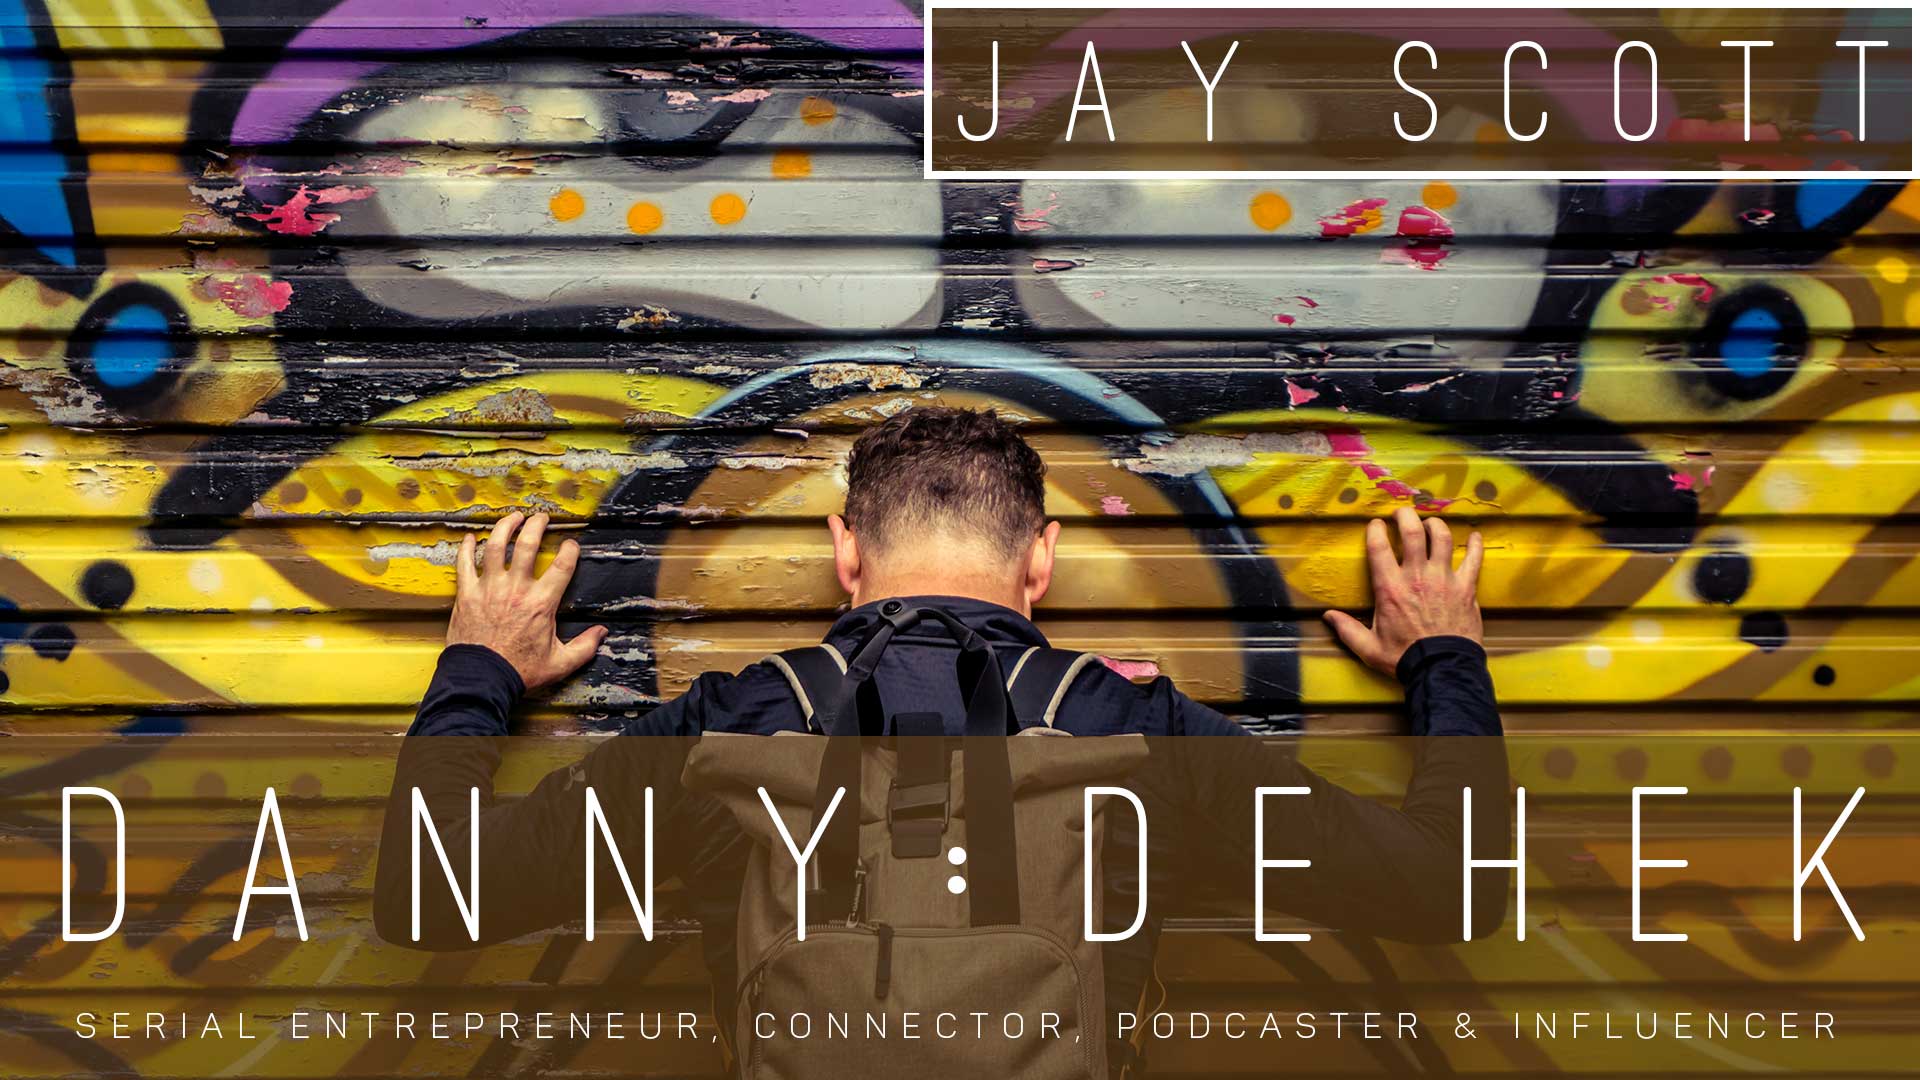 WHAT DE HEK Podcast 12 Questions with Jay Scott Jay the Comediannbsp› Entrepreneur Decision Maker Connector Podcaster Educator